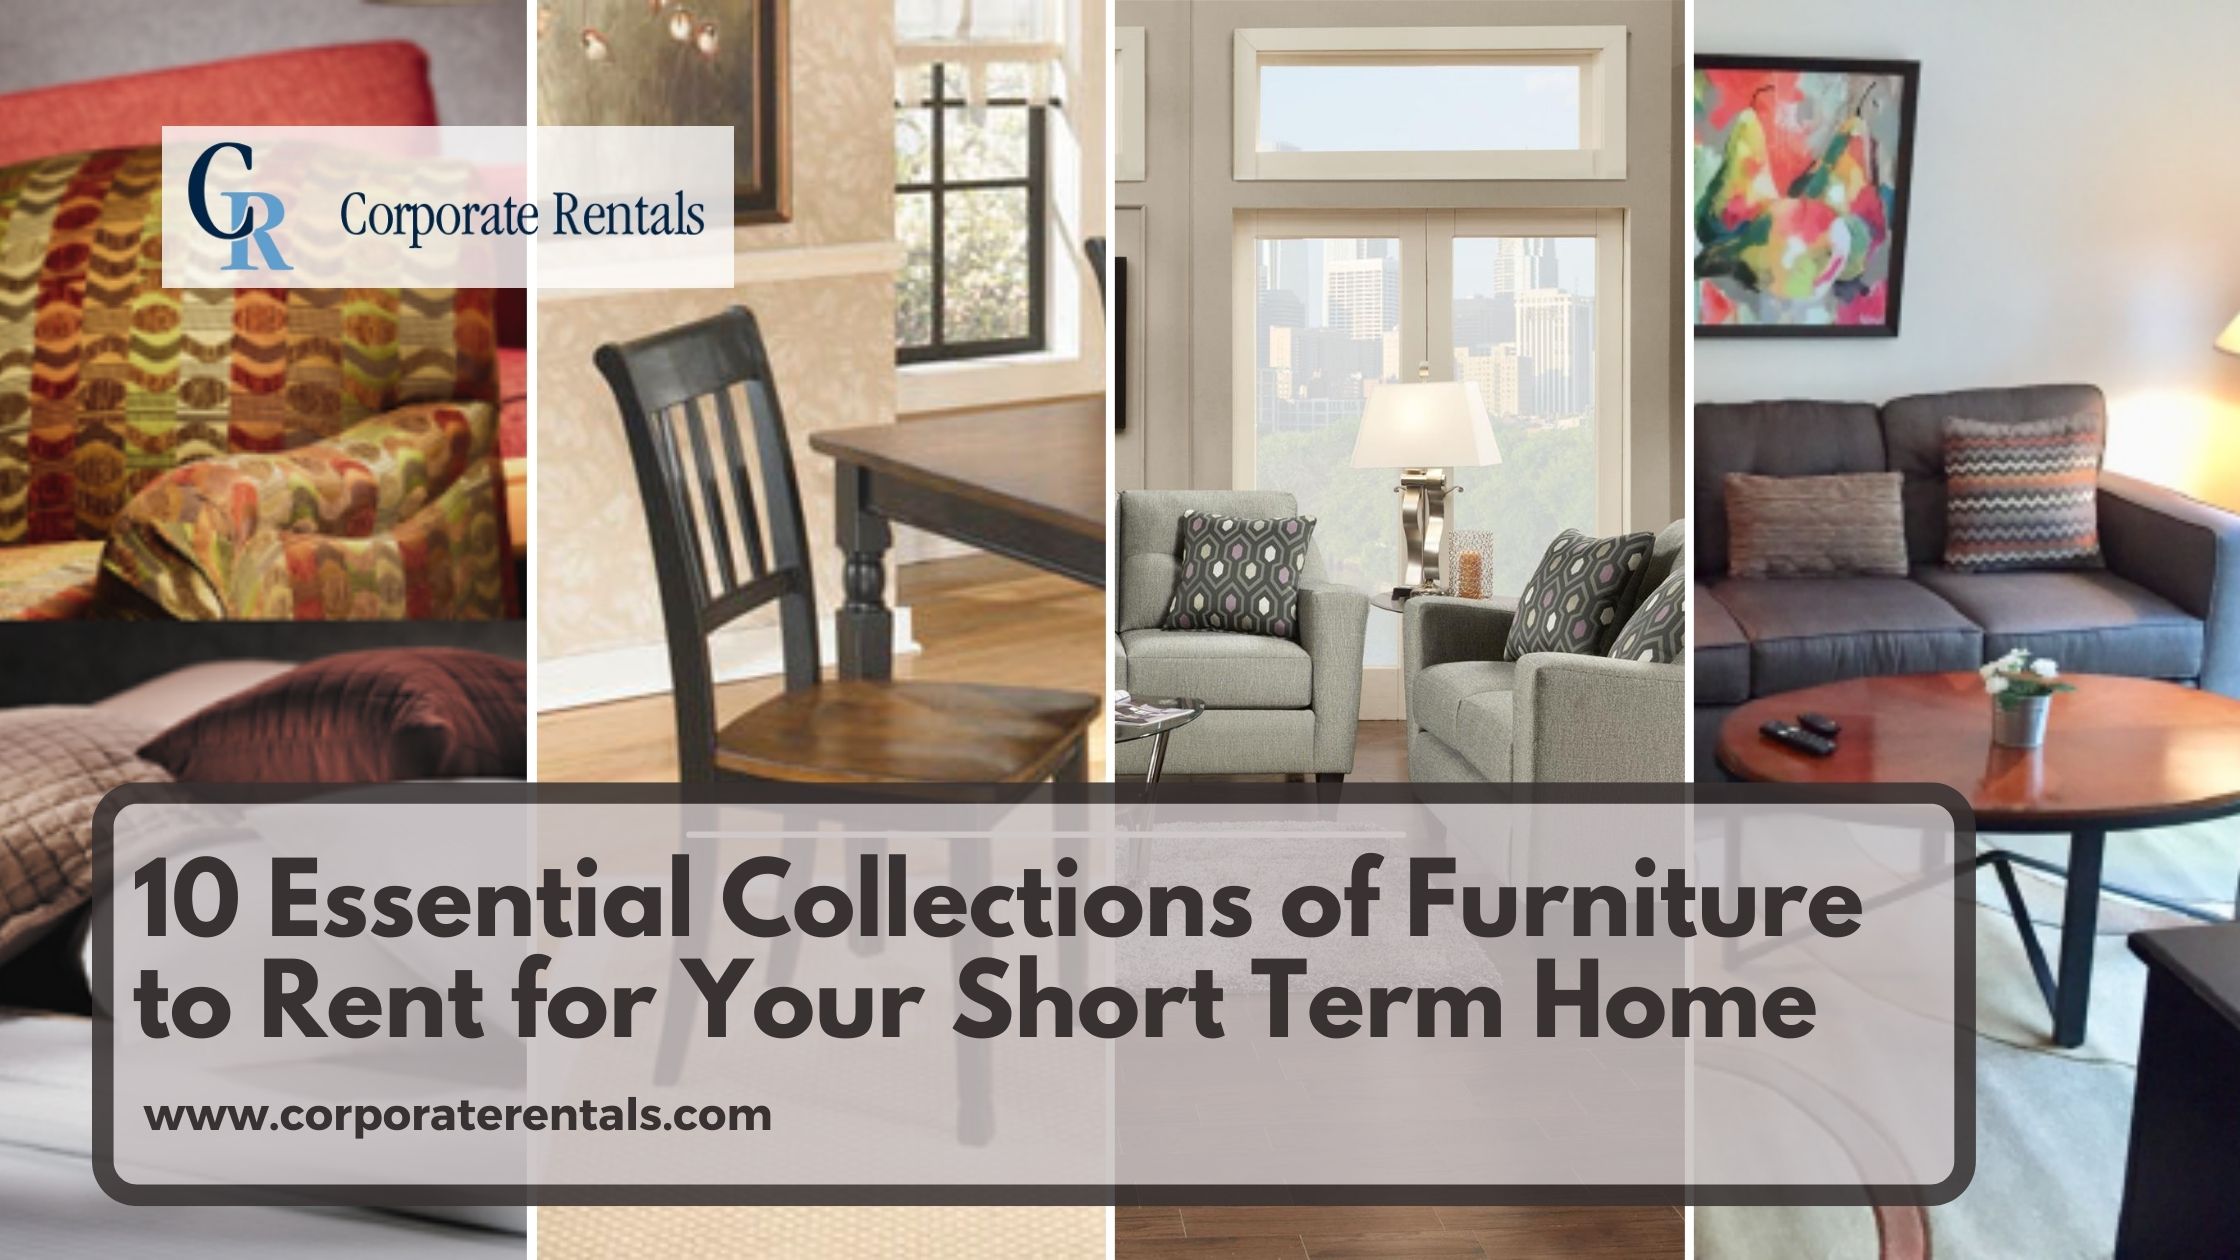 10 Essential Collections of Furniture to Rent for Your Short Term Home